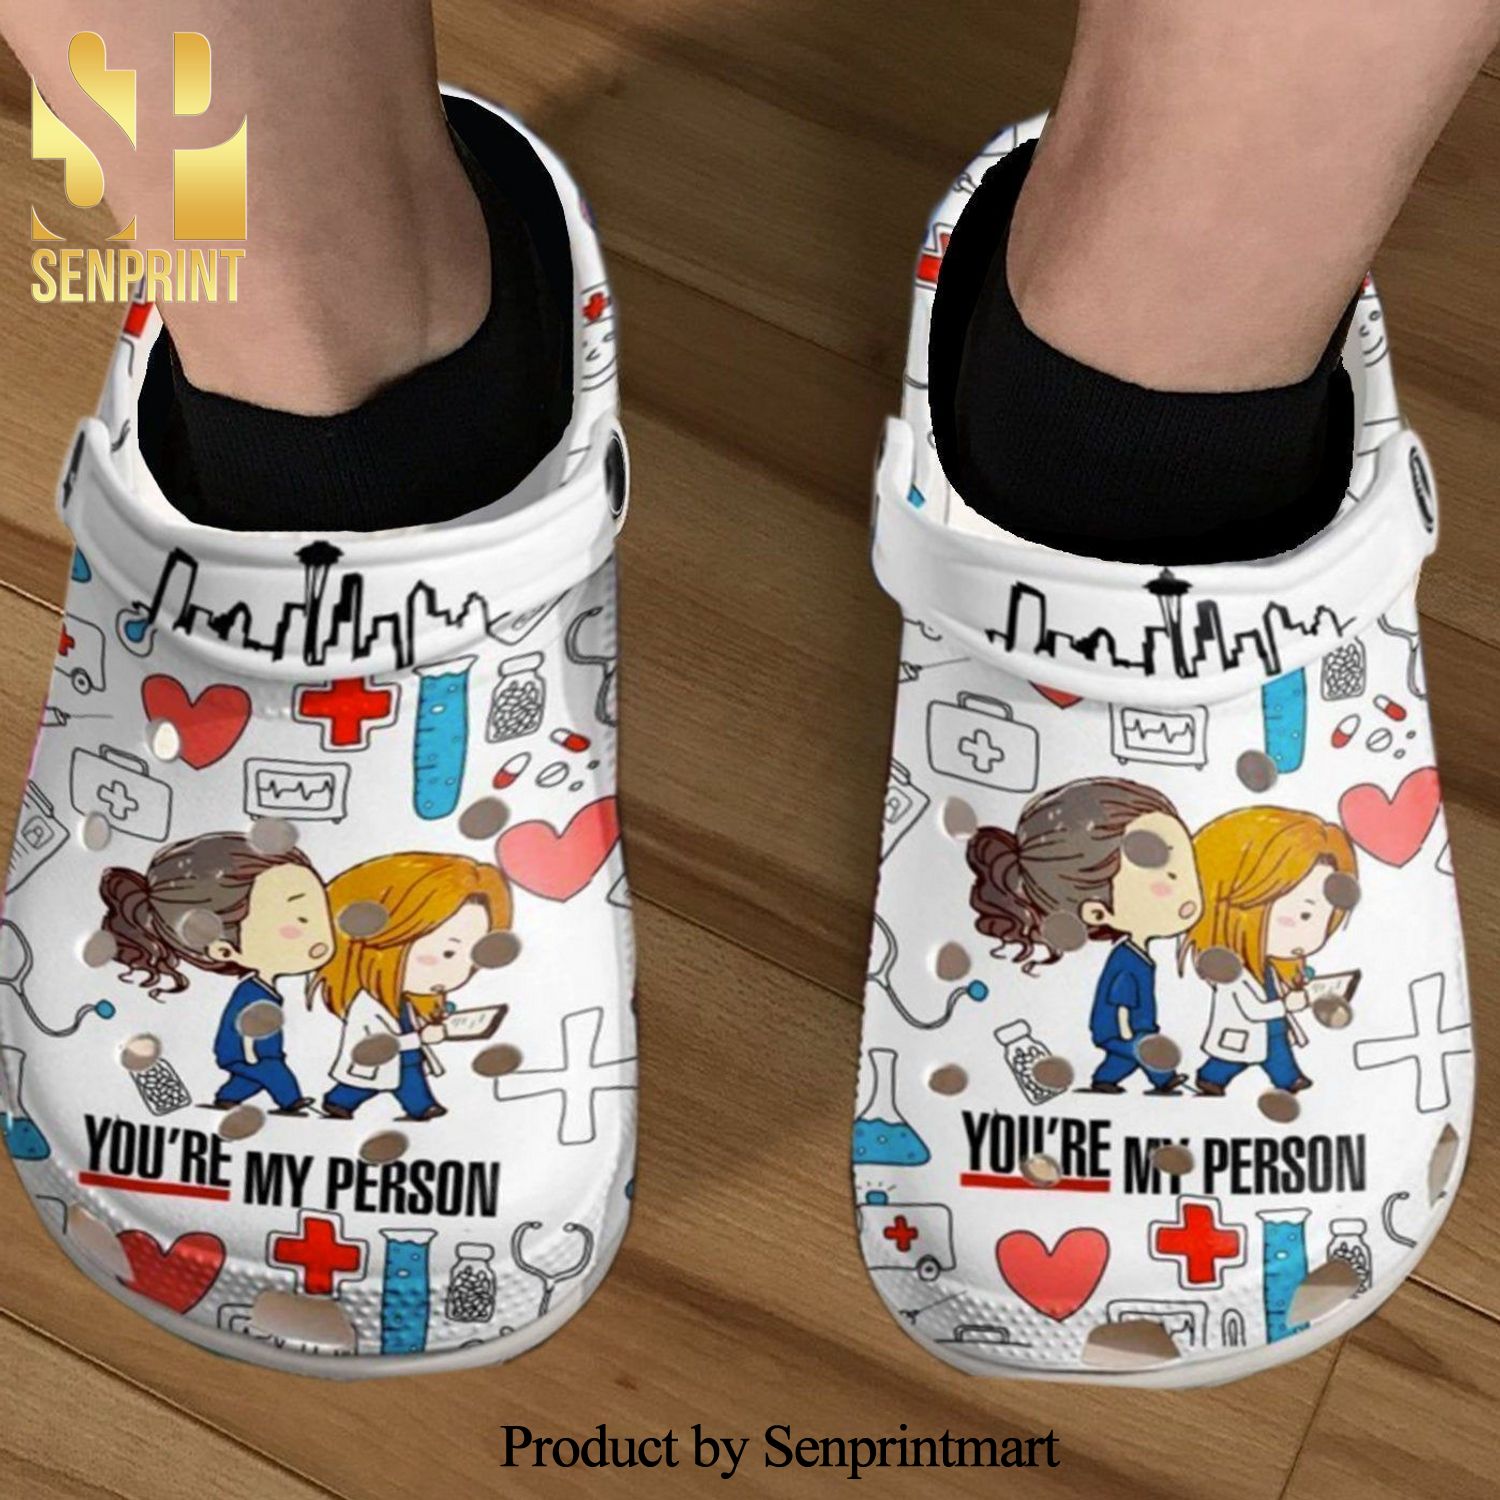 You’re my person Full Printed Classic Crocs Crocband Clog